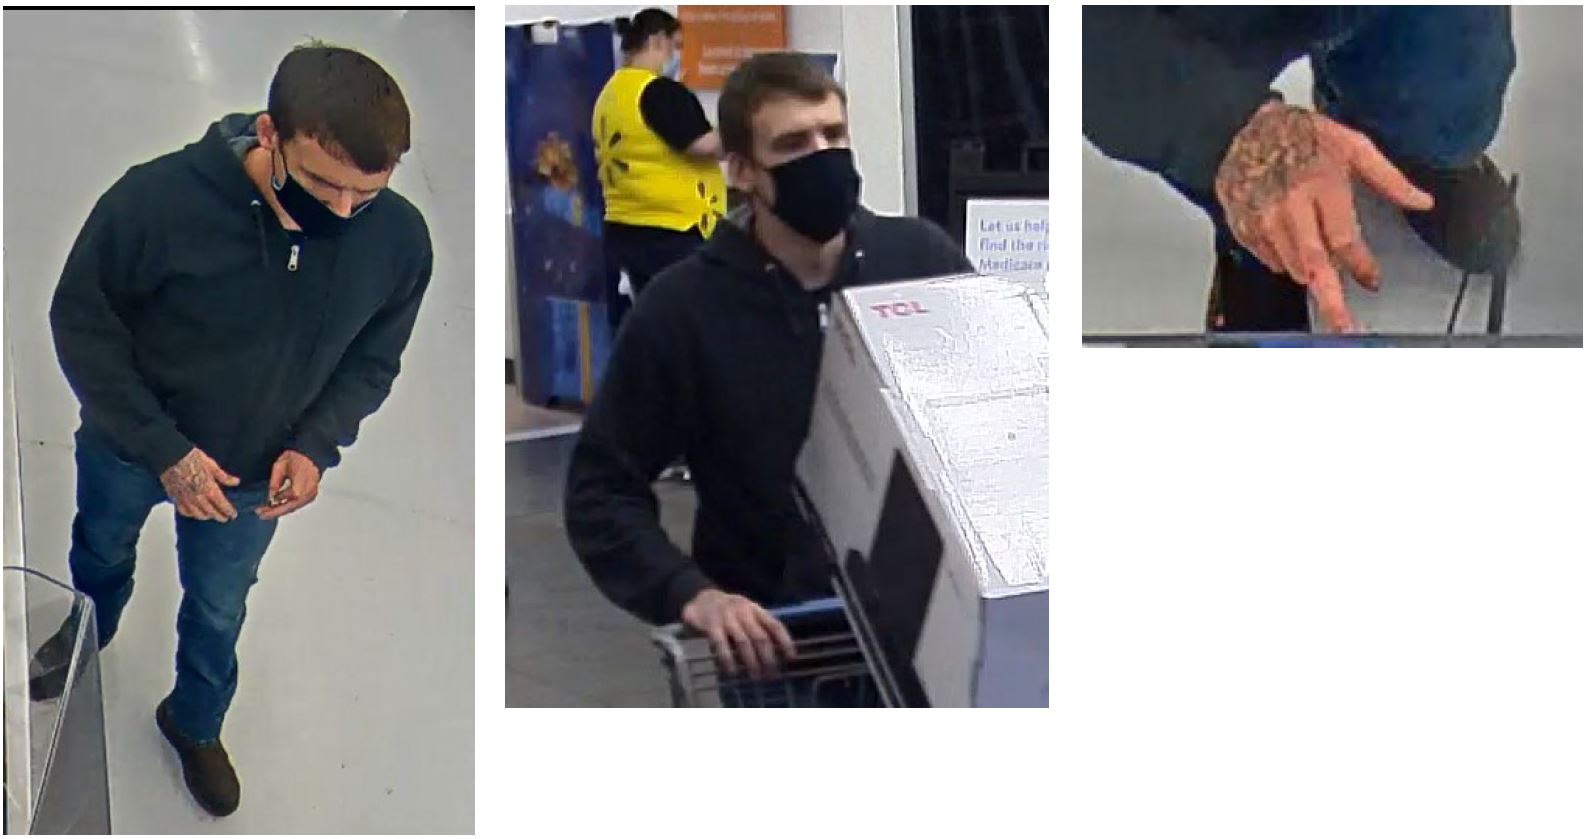 Photo collage consisting of 3 photos. Left is full body photo of suspect wearing a black mask, dark, zipped up hoodie, jeans and dark shoes. Middle photo is of suspect pushing shopping cart. Photo on right is a close up of suspect's right hand showing an intricate tattoo. 